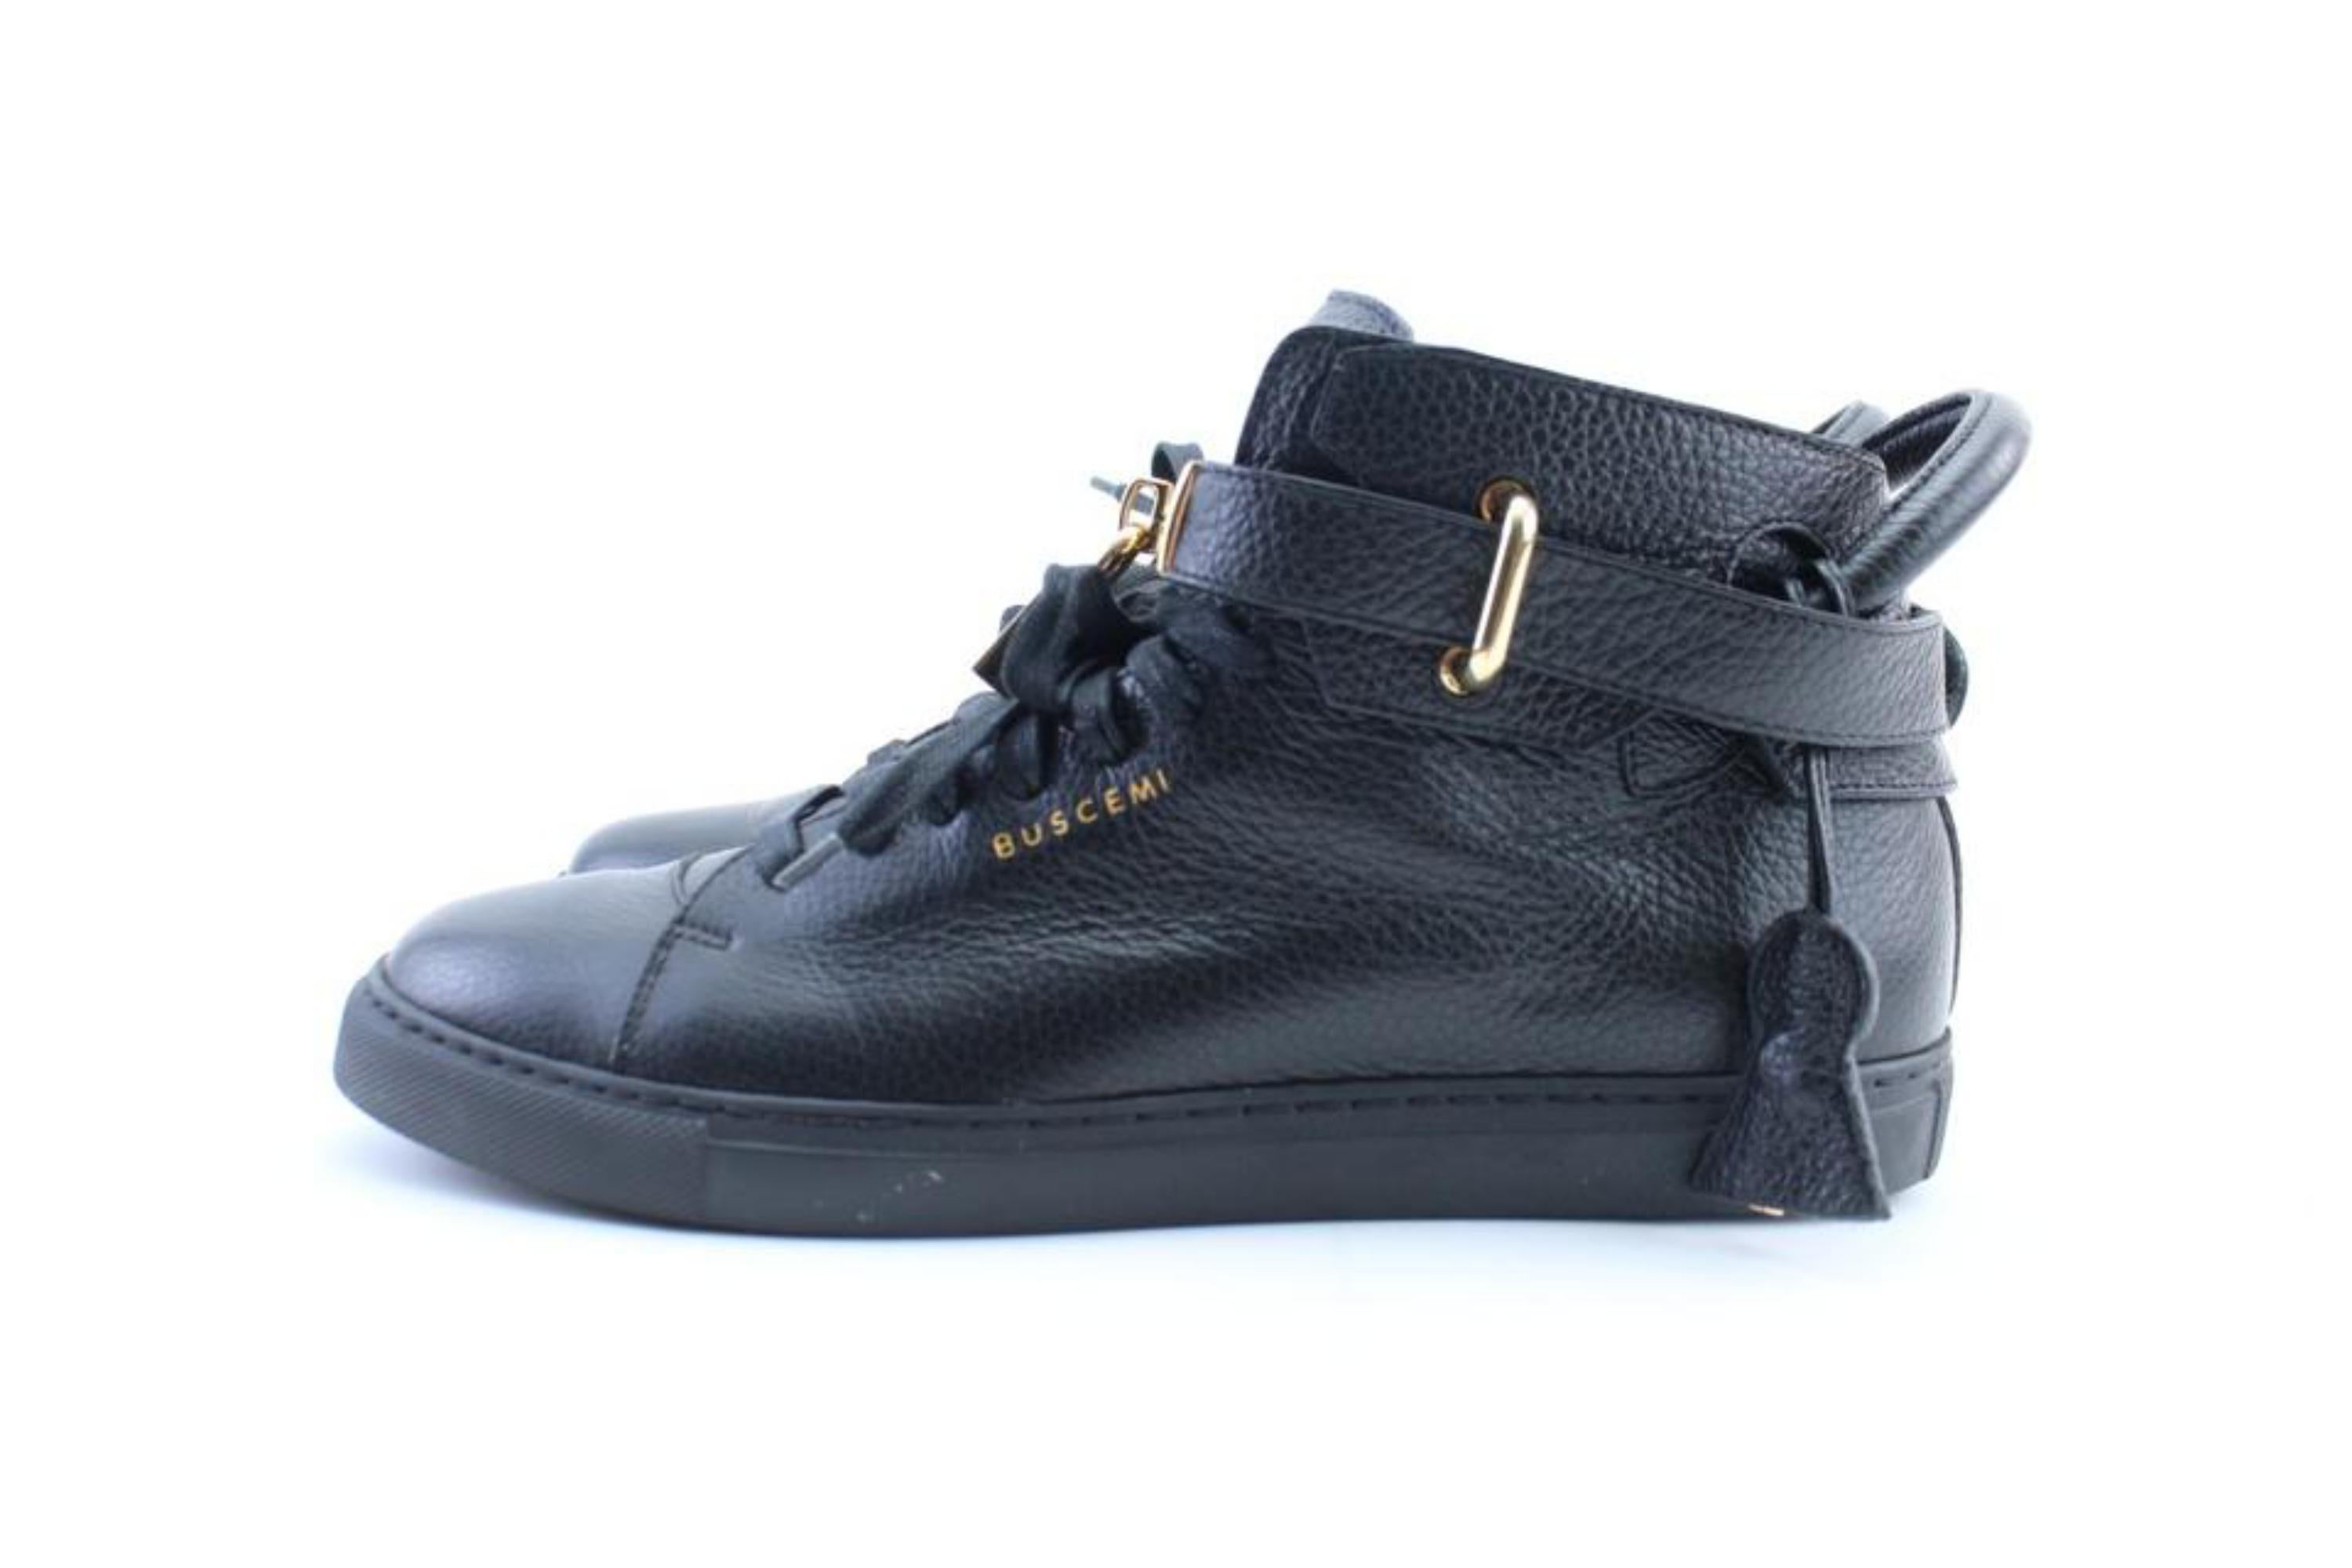 Buscemi Black 100mm High-top Padlock 22mr0212 Sneakers For Sale 5